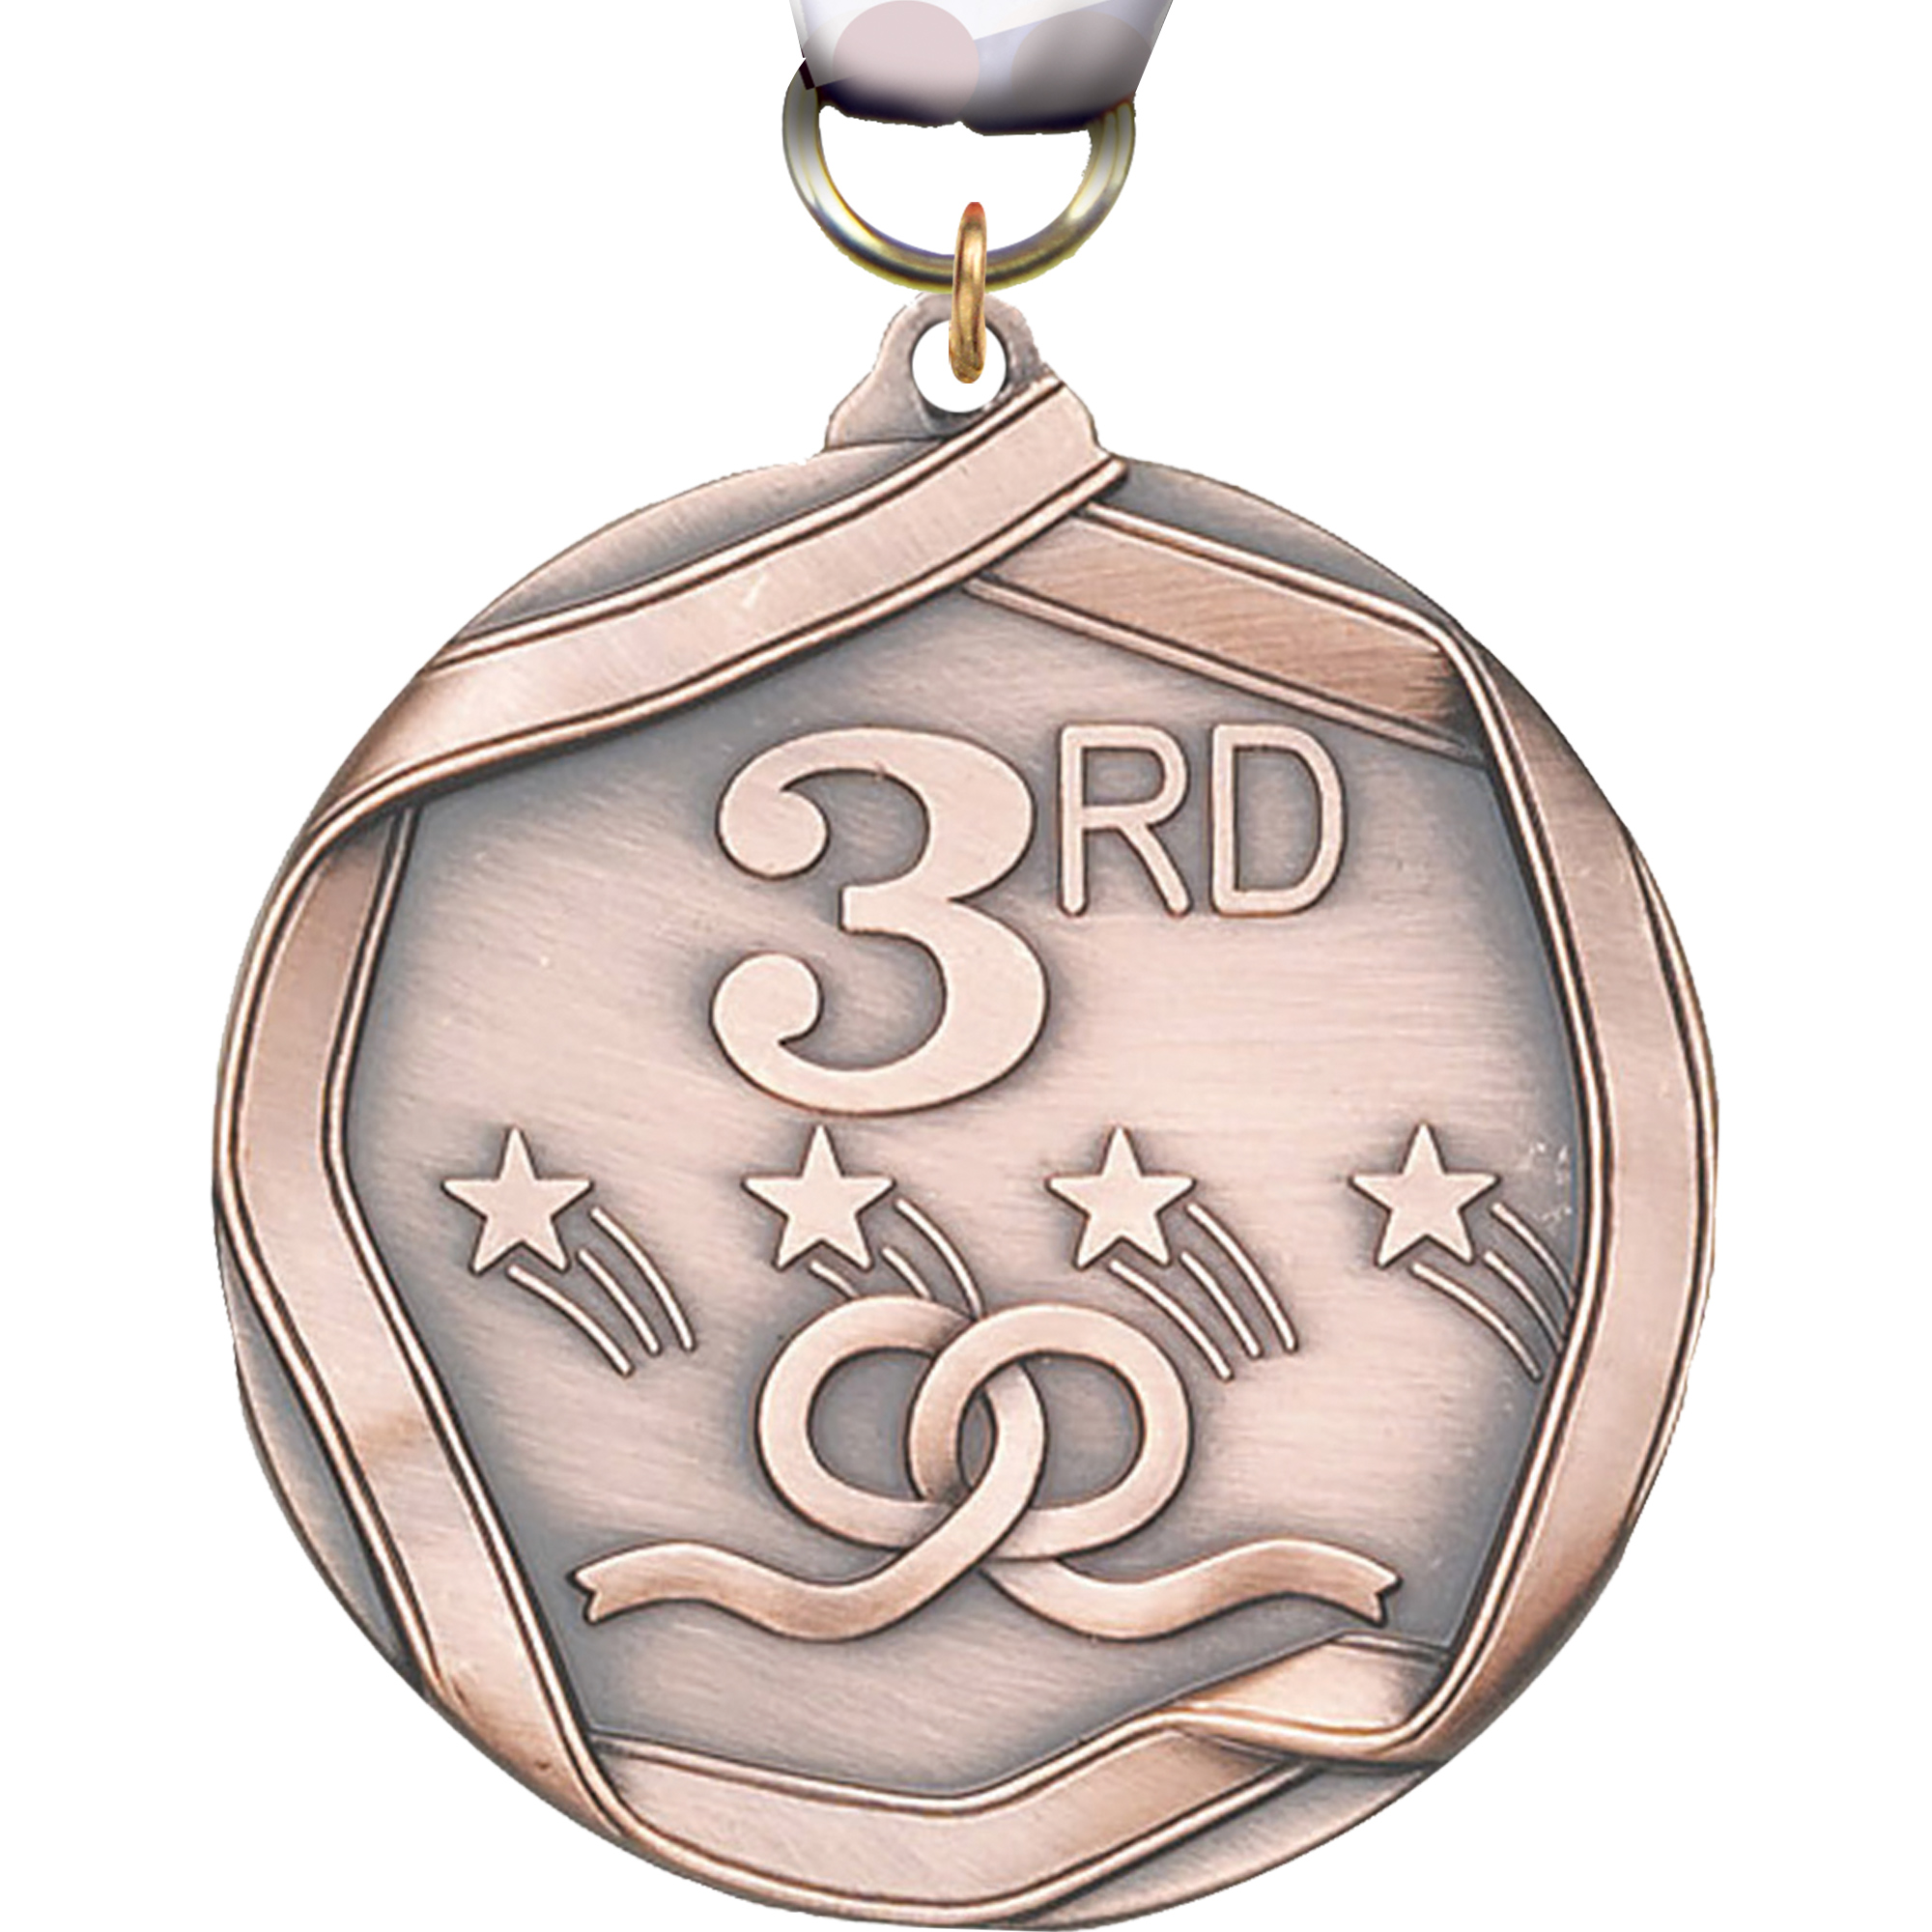 3rd Place Banner Edge Medal